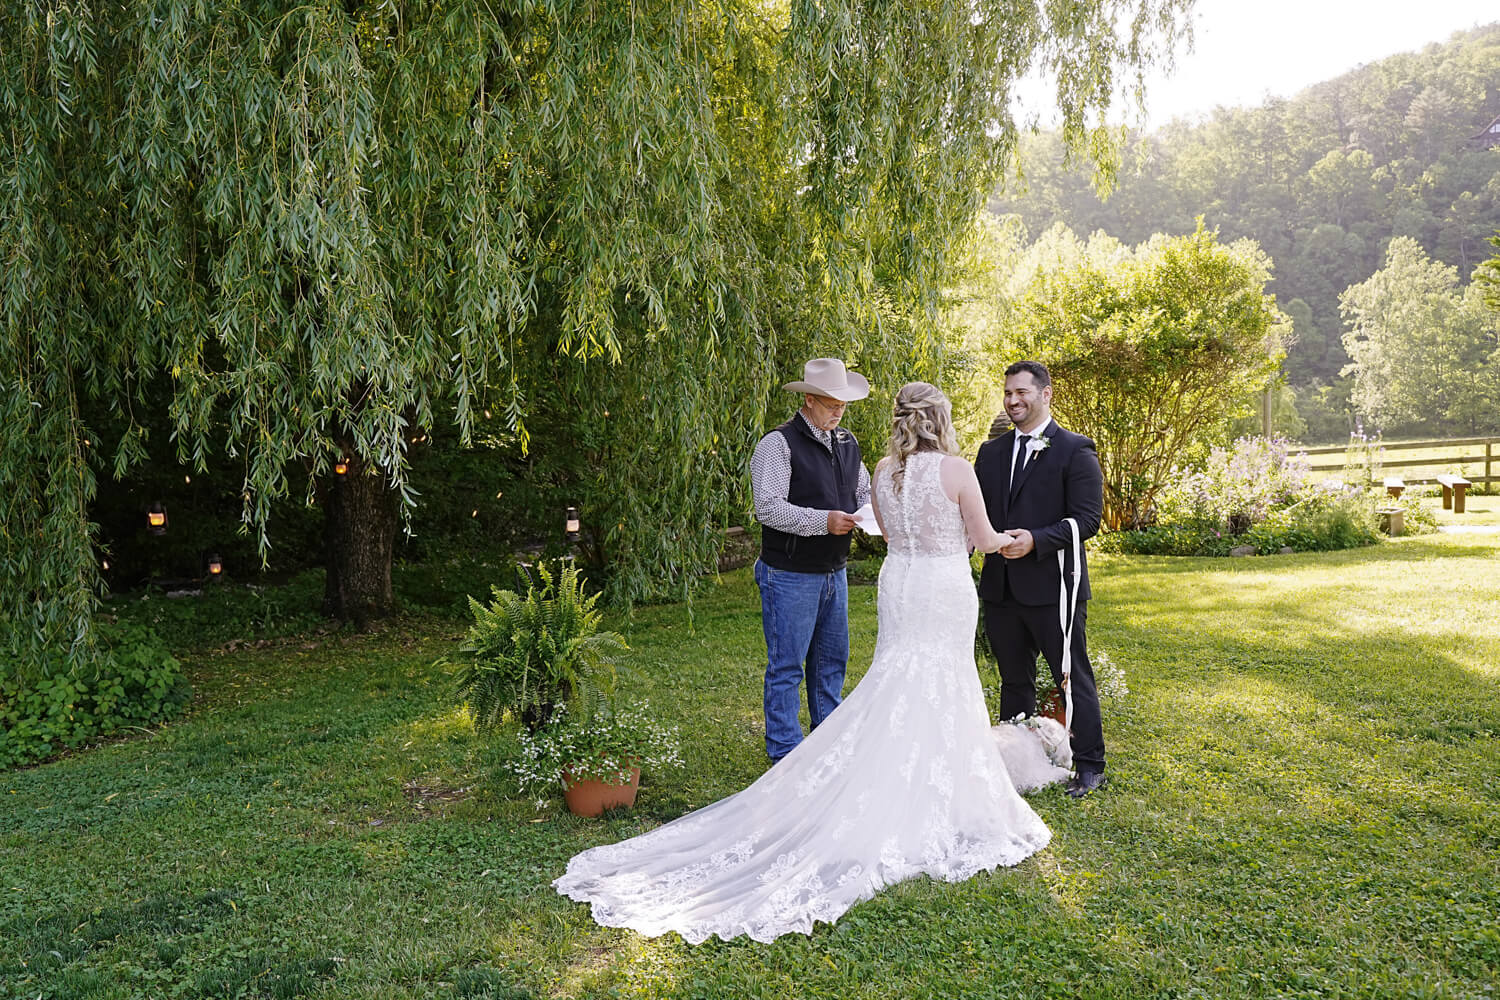 Wedding couple saying their vows under a weeping willow tree in Pigeon Forge Tennessee with their dog